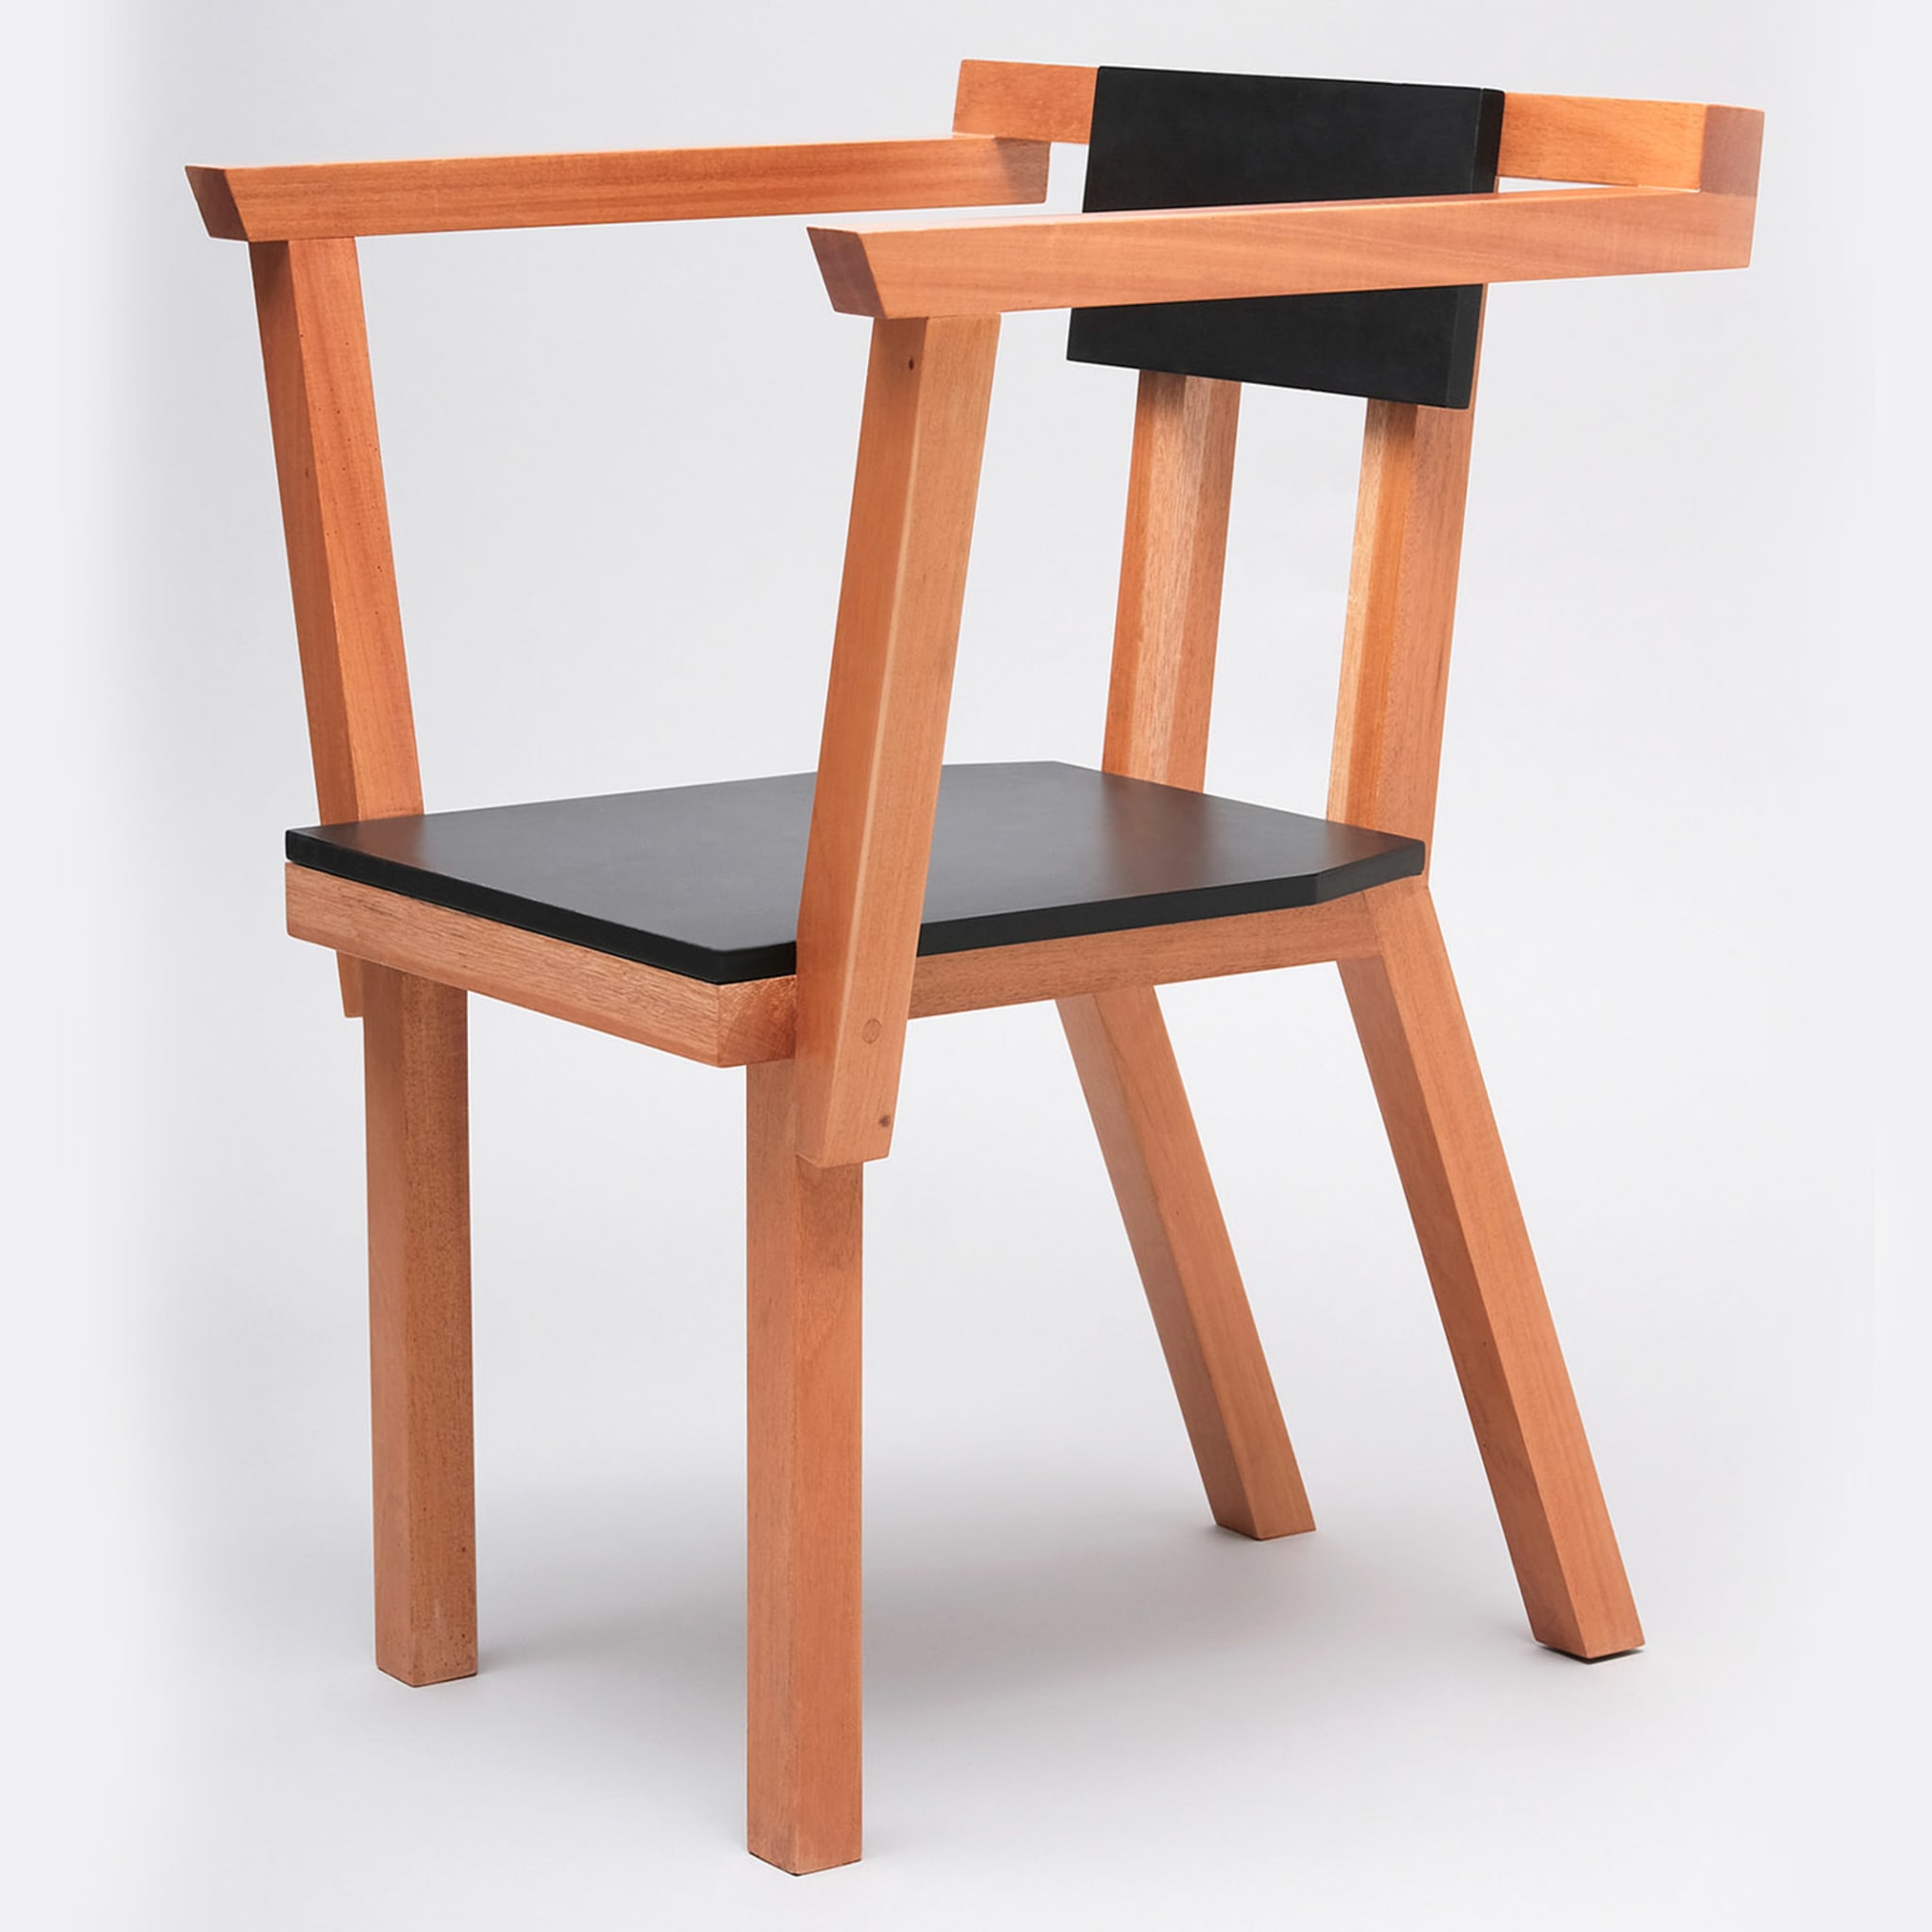 Kaspa Negra Chair With Arms By Clemence Seilles - Alternative view 4